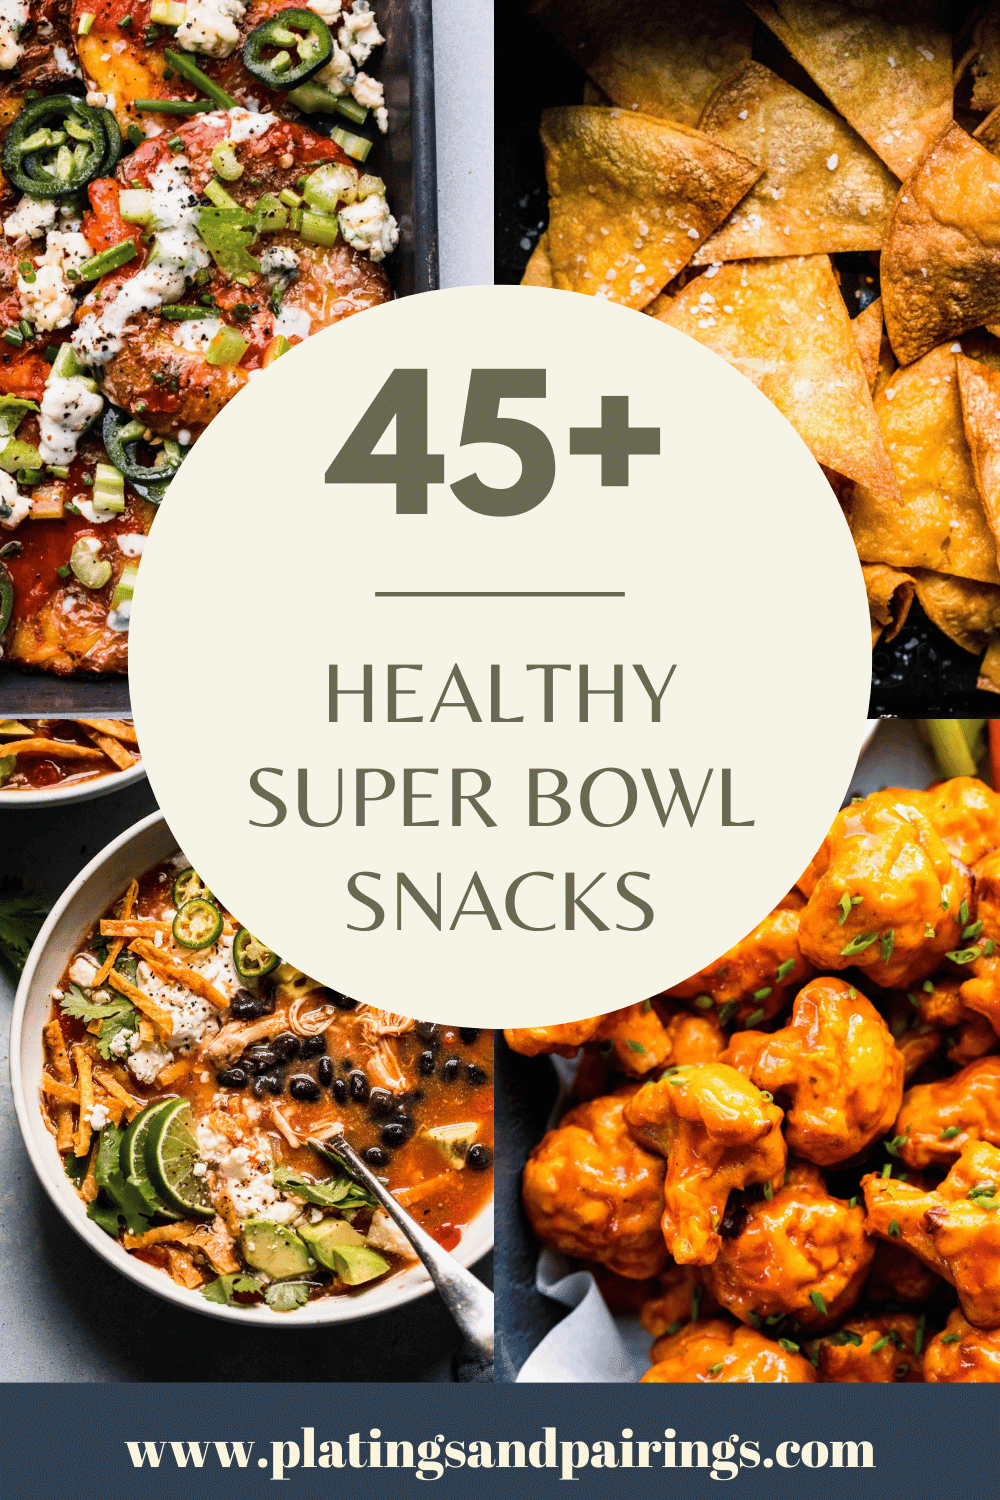 Collage of healthy super bowl snacks with text overlay.